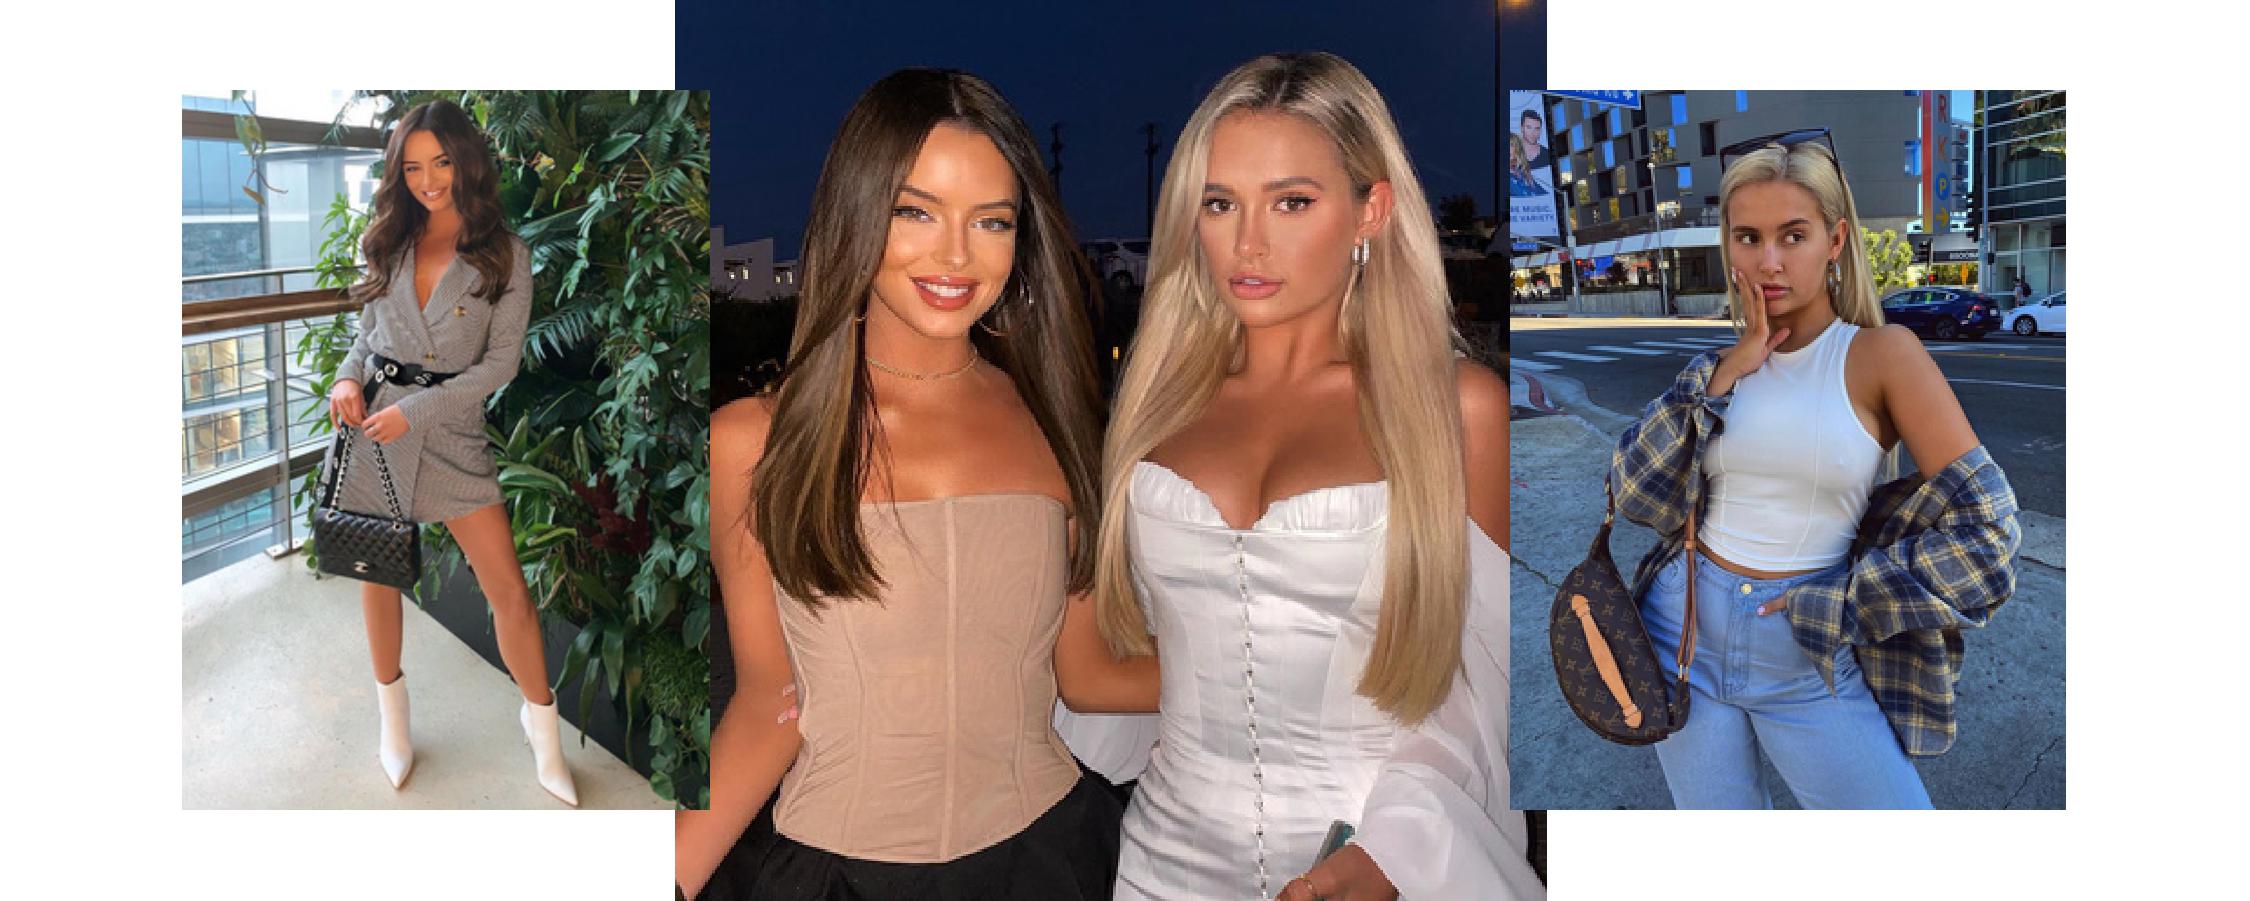 The bags of: Love Island besties Molly-Mae Hague and Maura Higgins